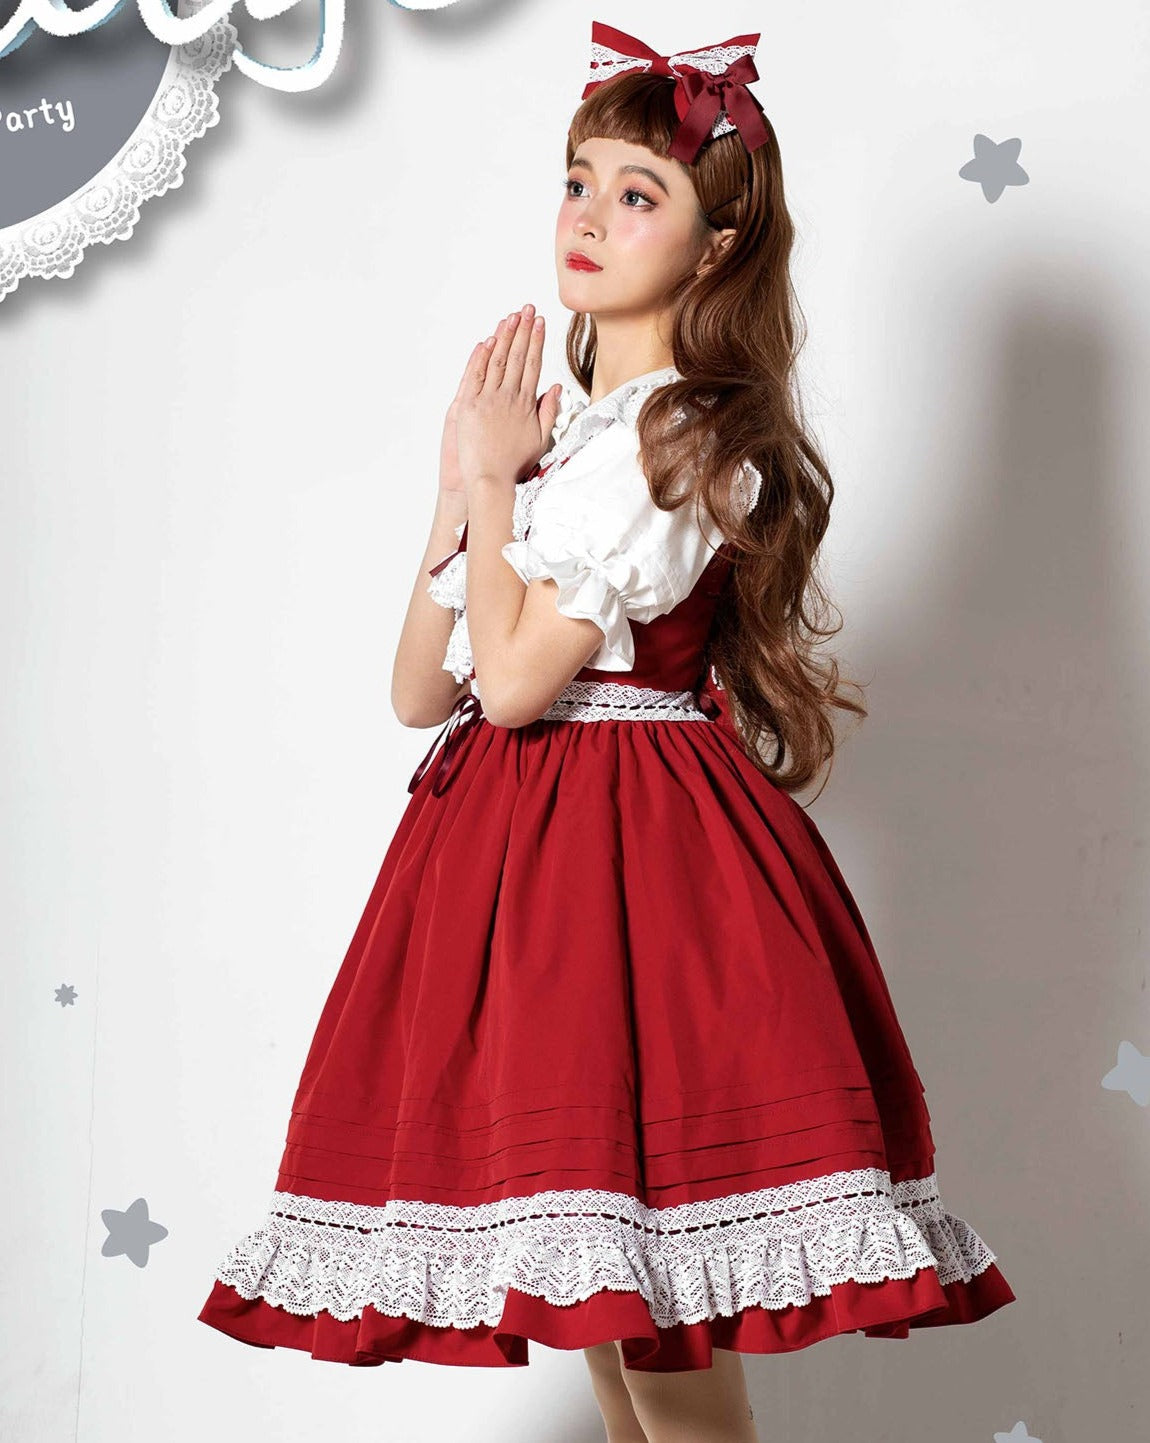 Ruffled lace jumper skirt with headband All 10 colors